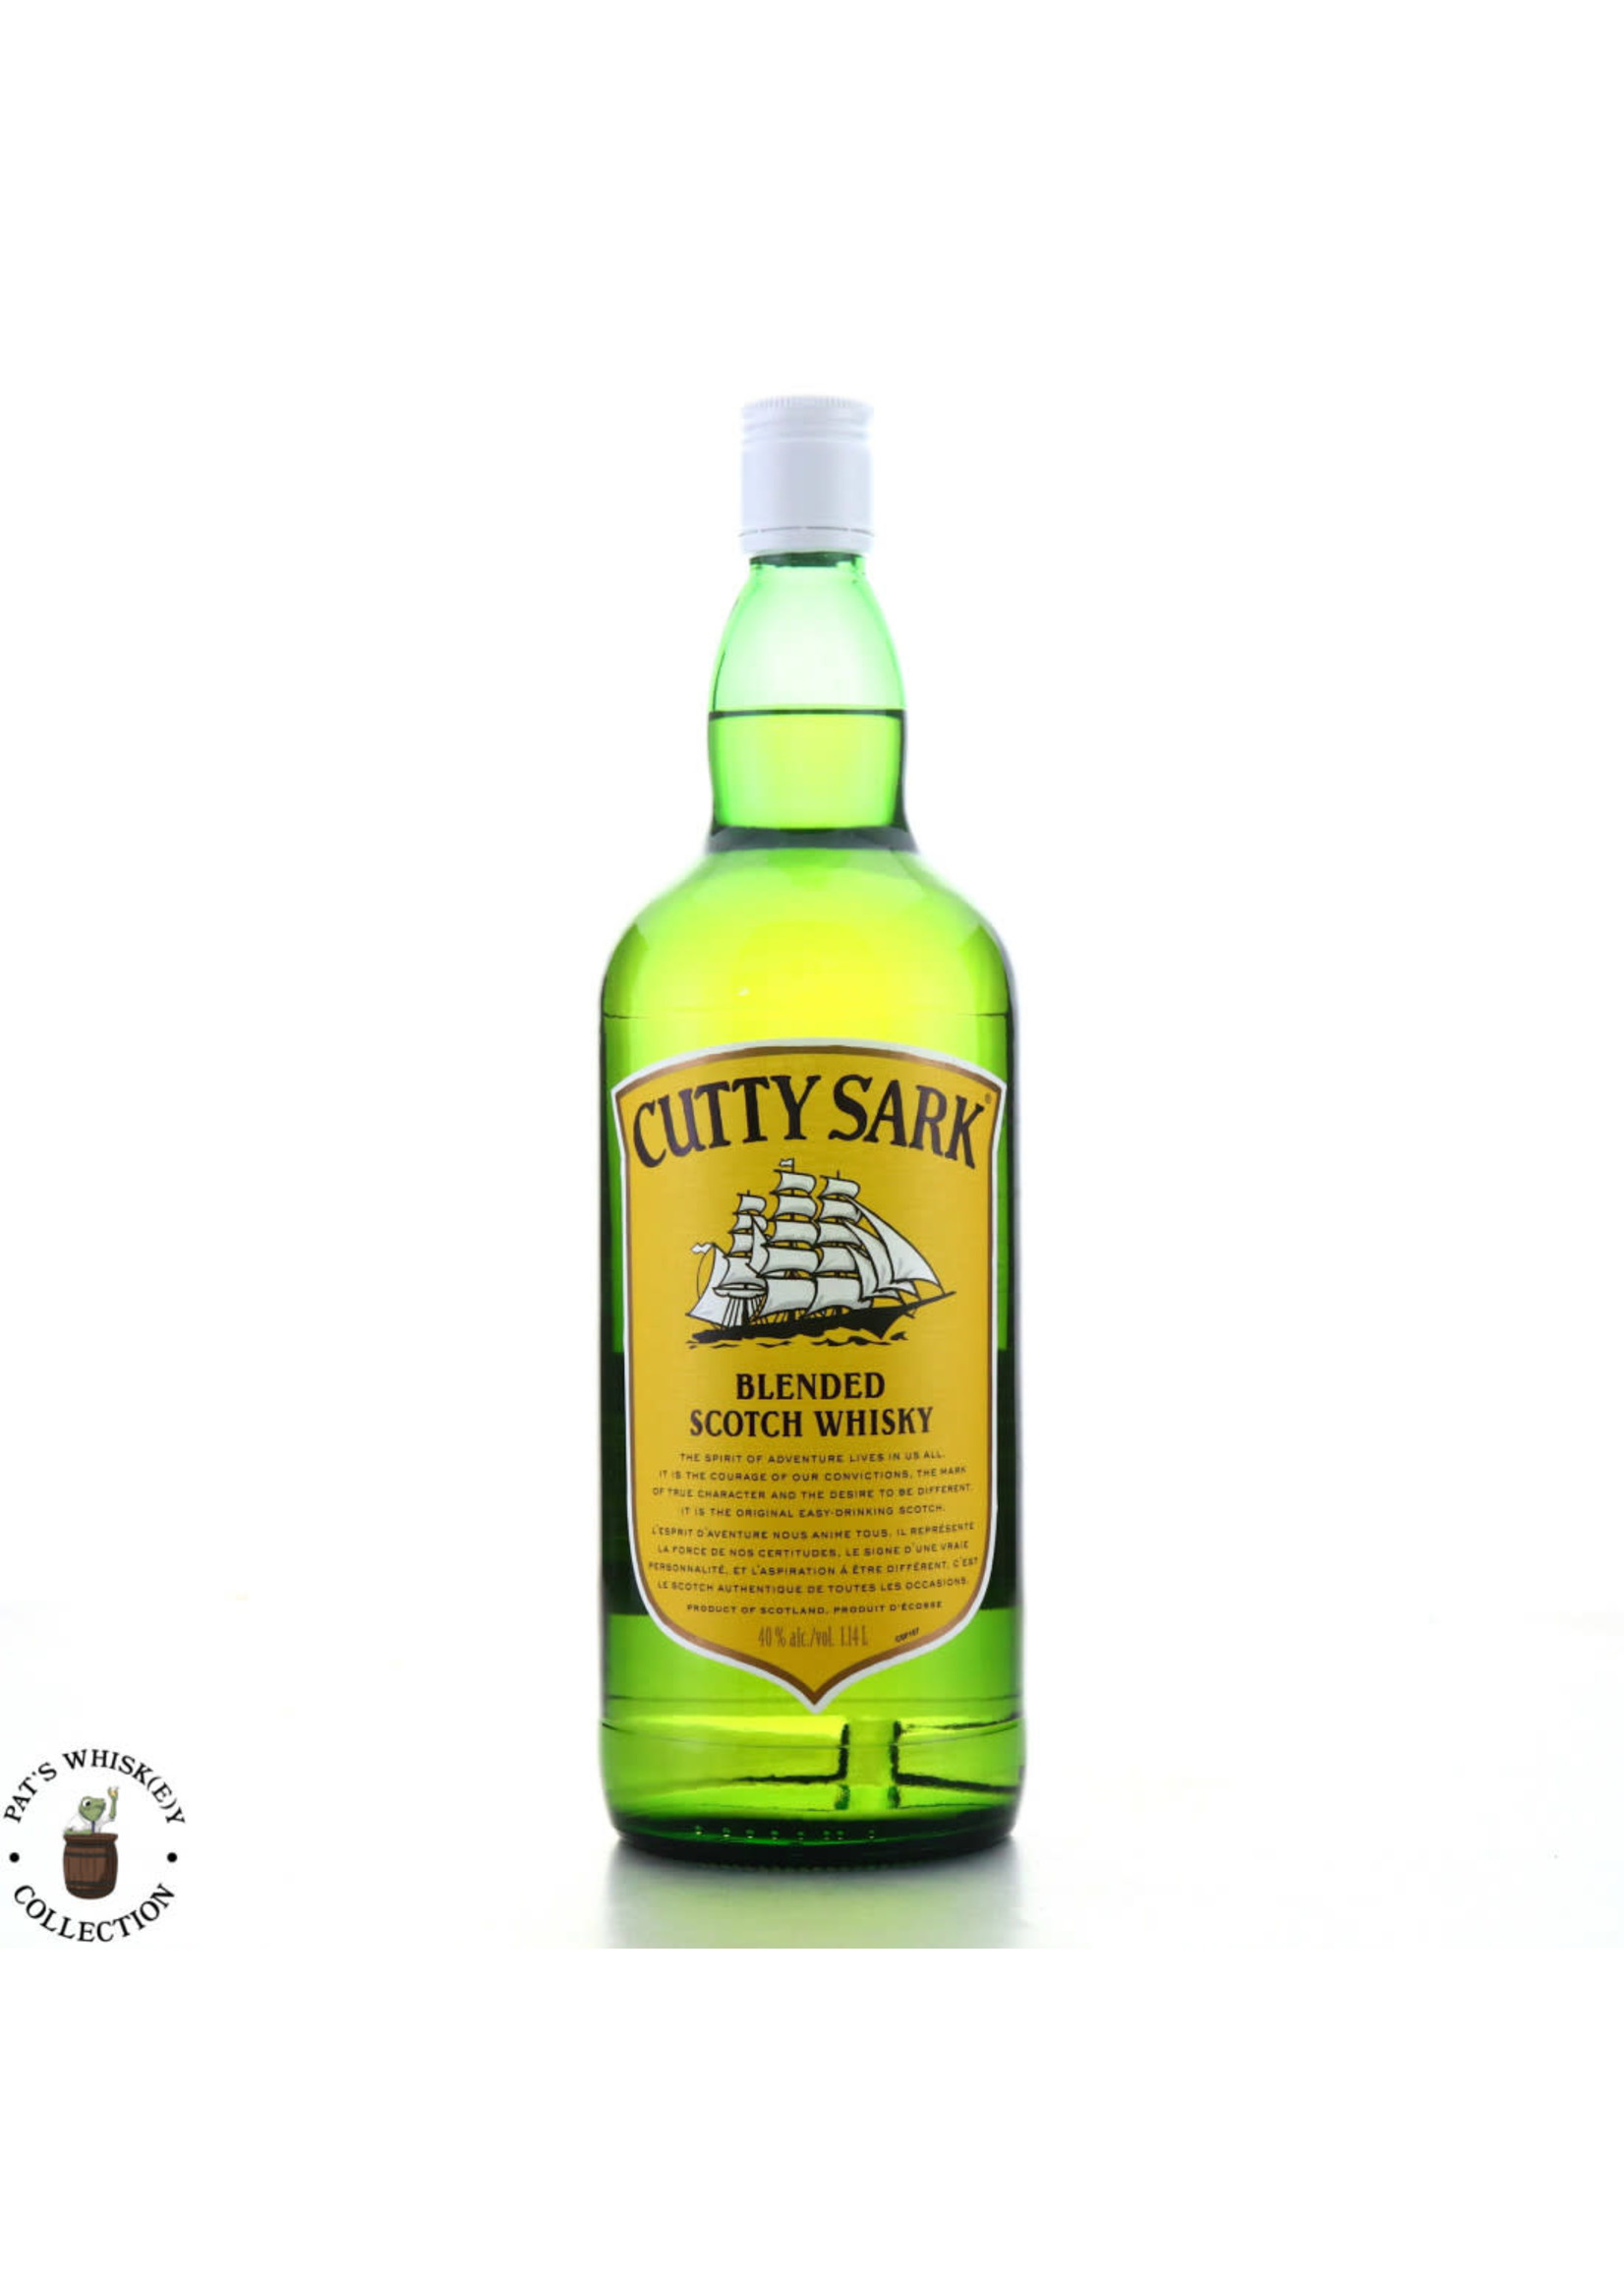 Cutty Sark Blended Scotch Whisky 80Proof 1 Ltr